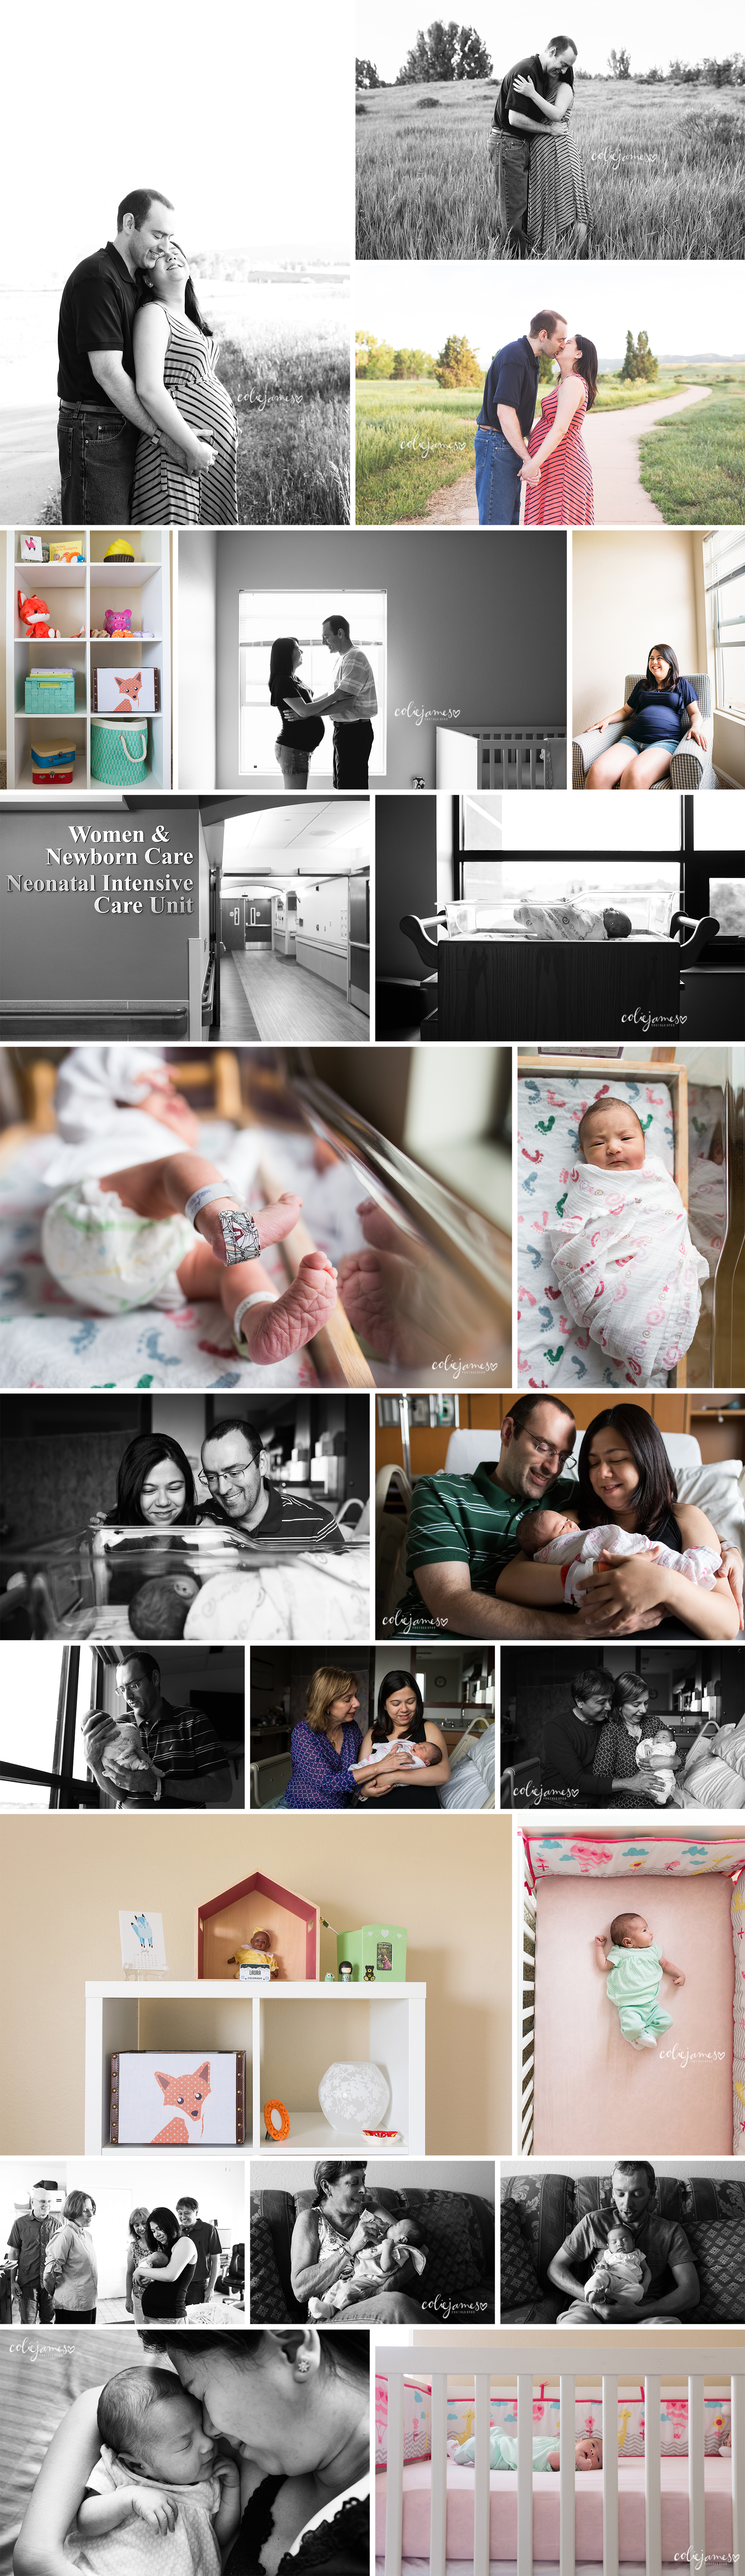 denver newborn photography life in the 1st year colie james laura